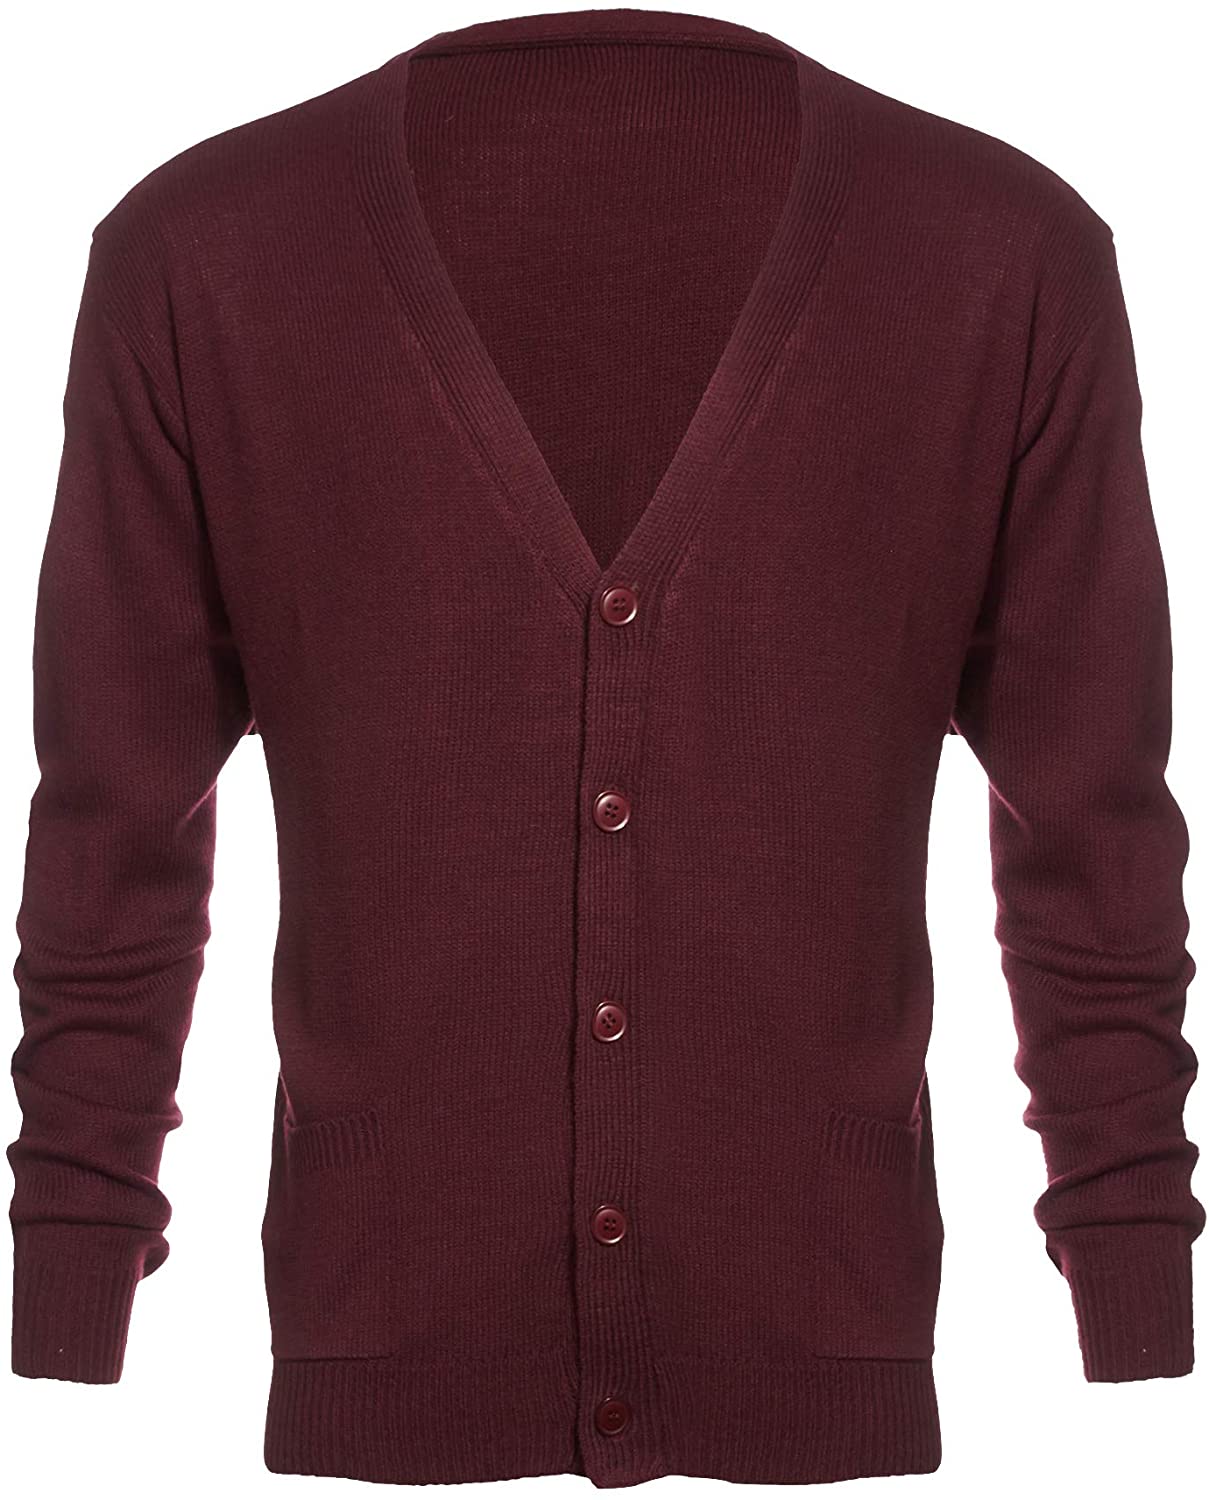 Knit Minded Mens Flat Knit Long Sleeve V-Neck Two Pocket Button Down